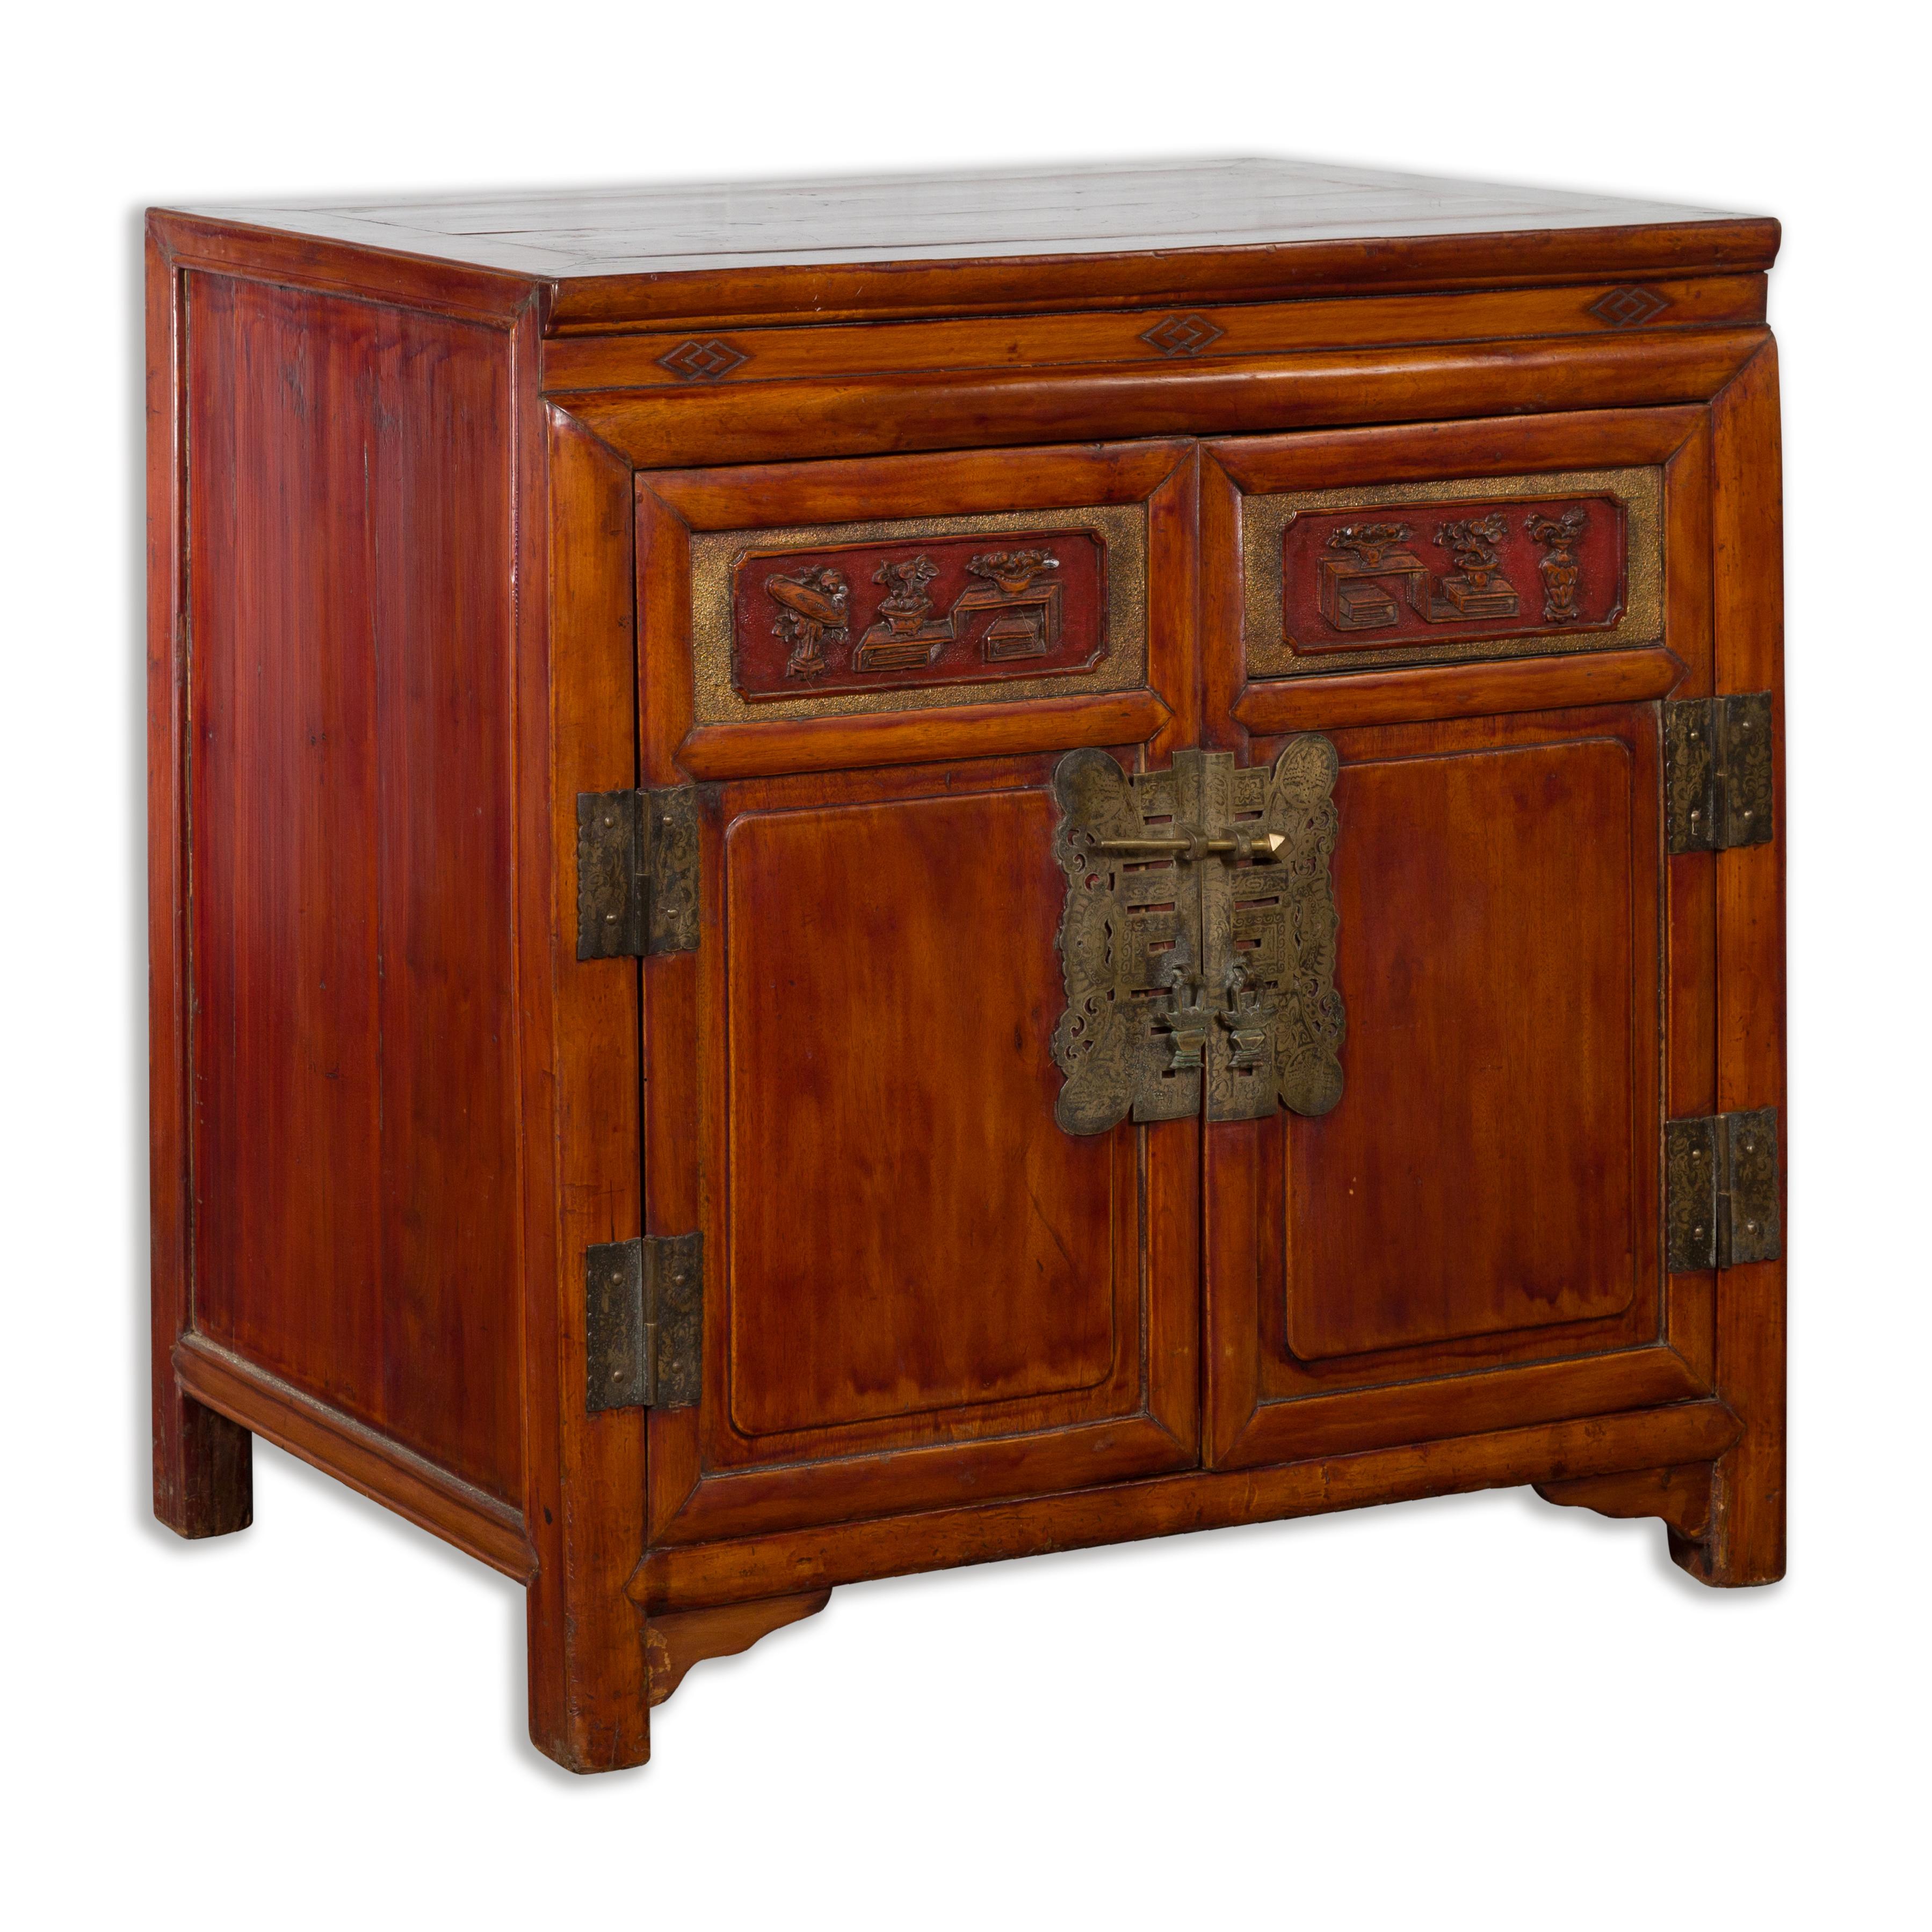 Antique Chinese Side Cabinet with Carved Panels, Gilt Accents and Hidden Drawers For Sale 15